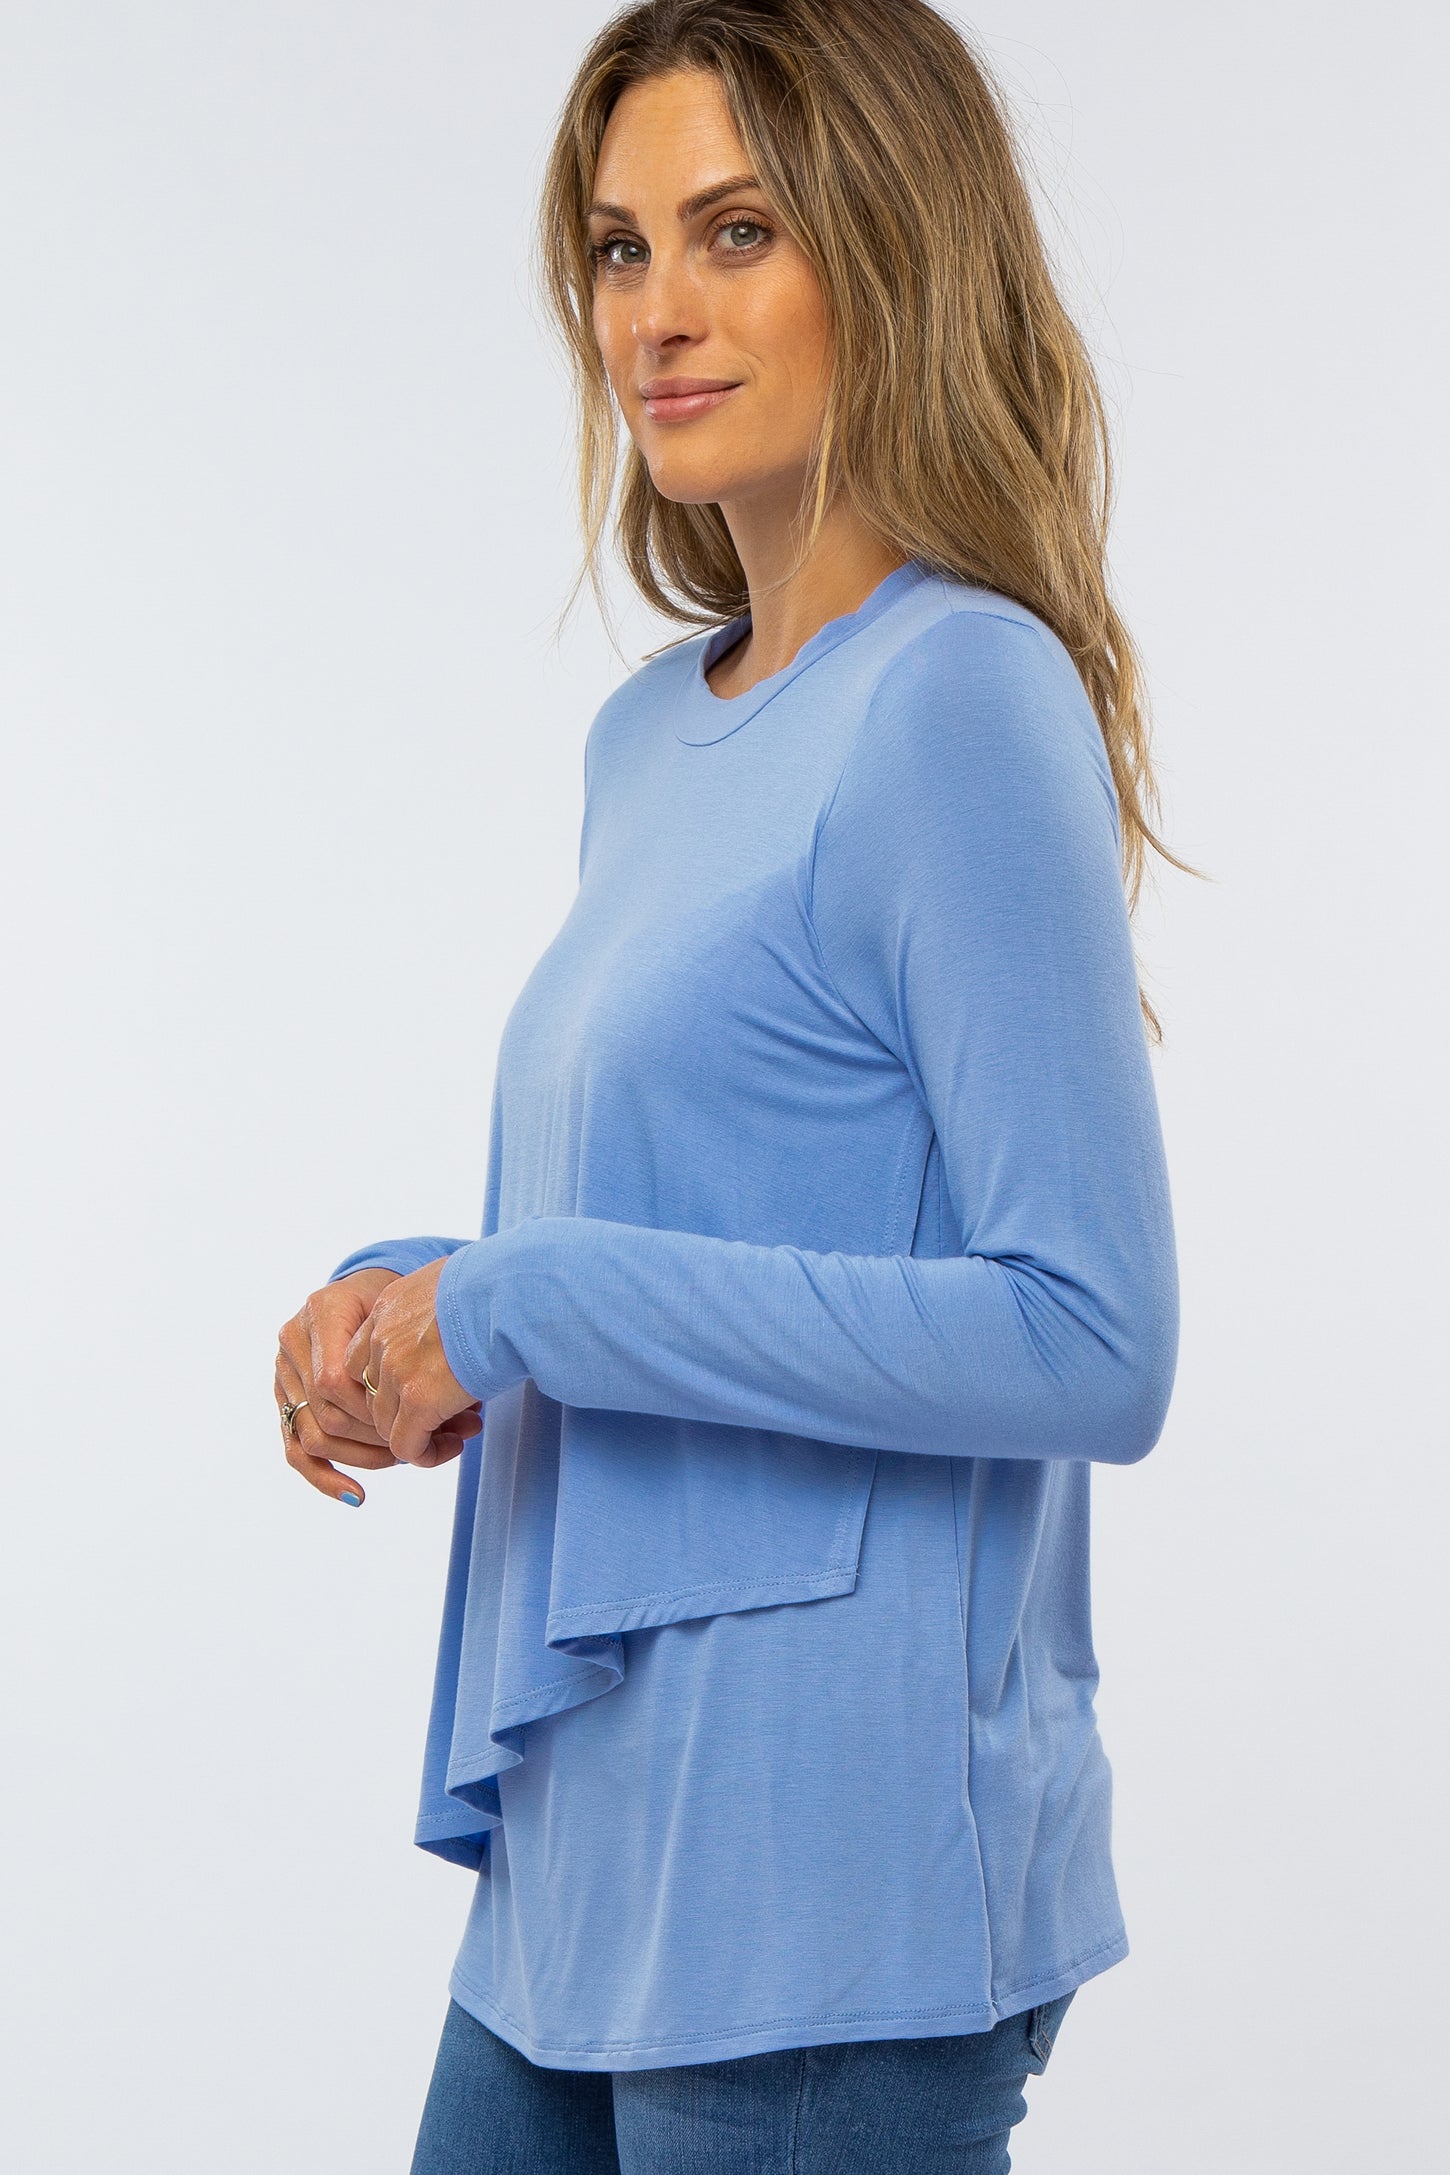 Light Blue Solid Layered Front Long Sleeve Nursing Top